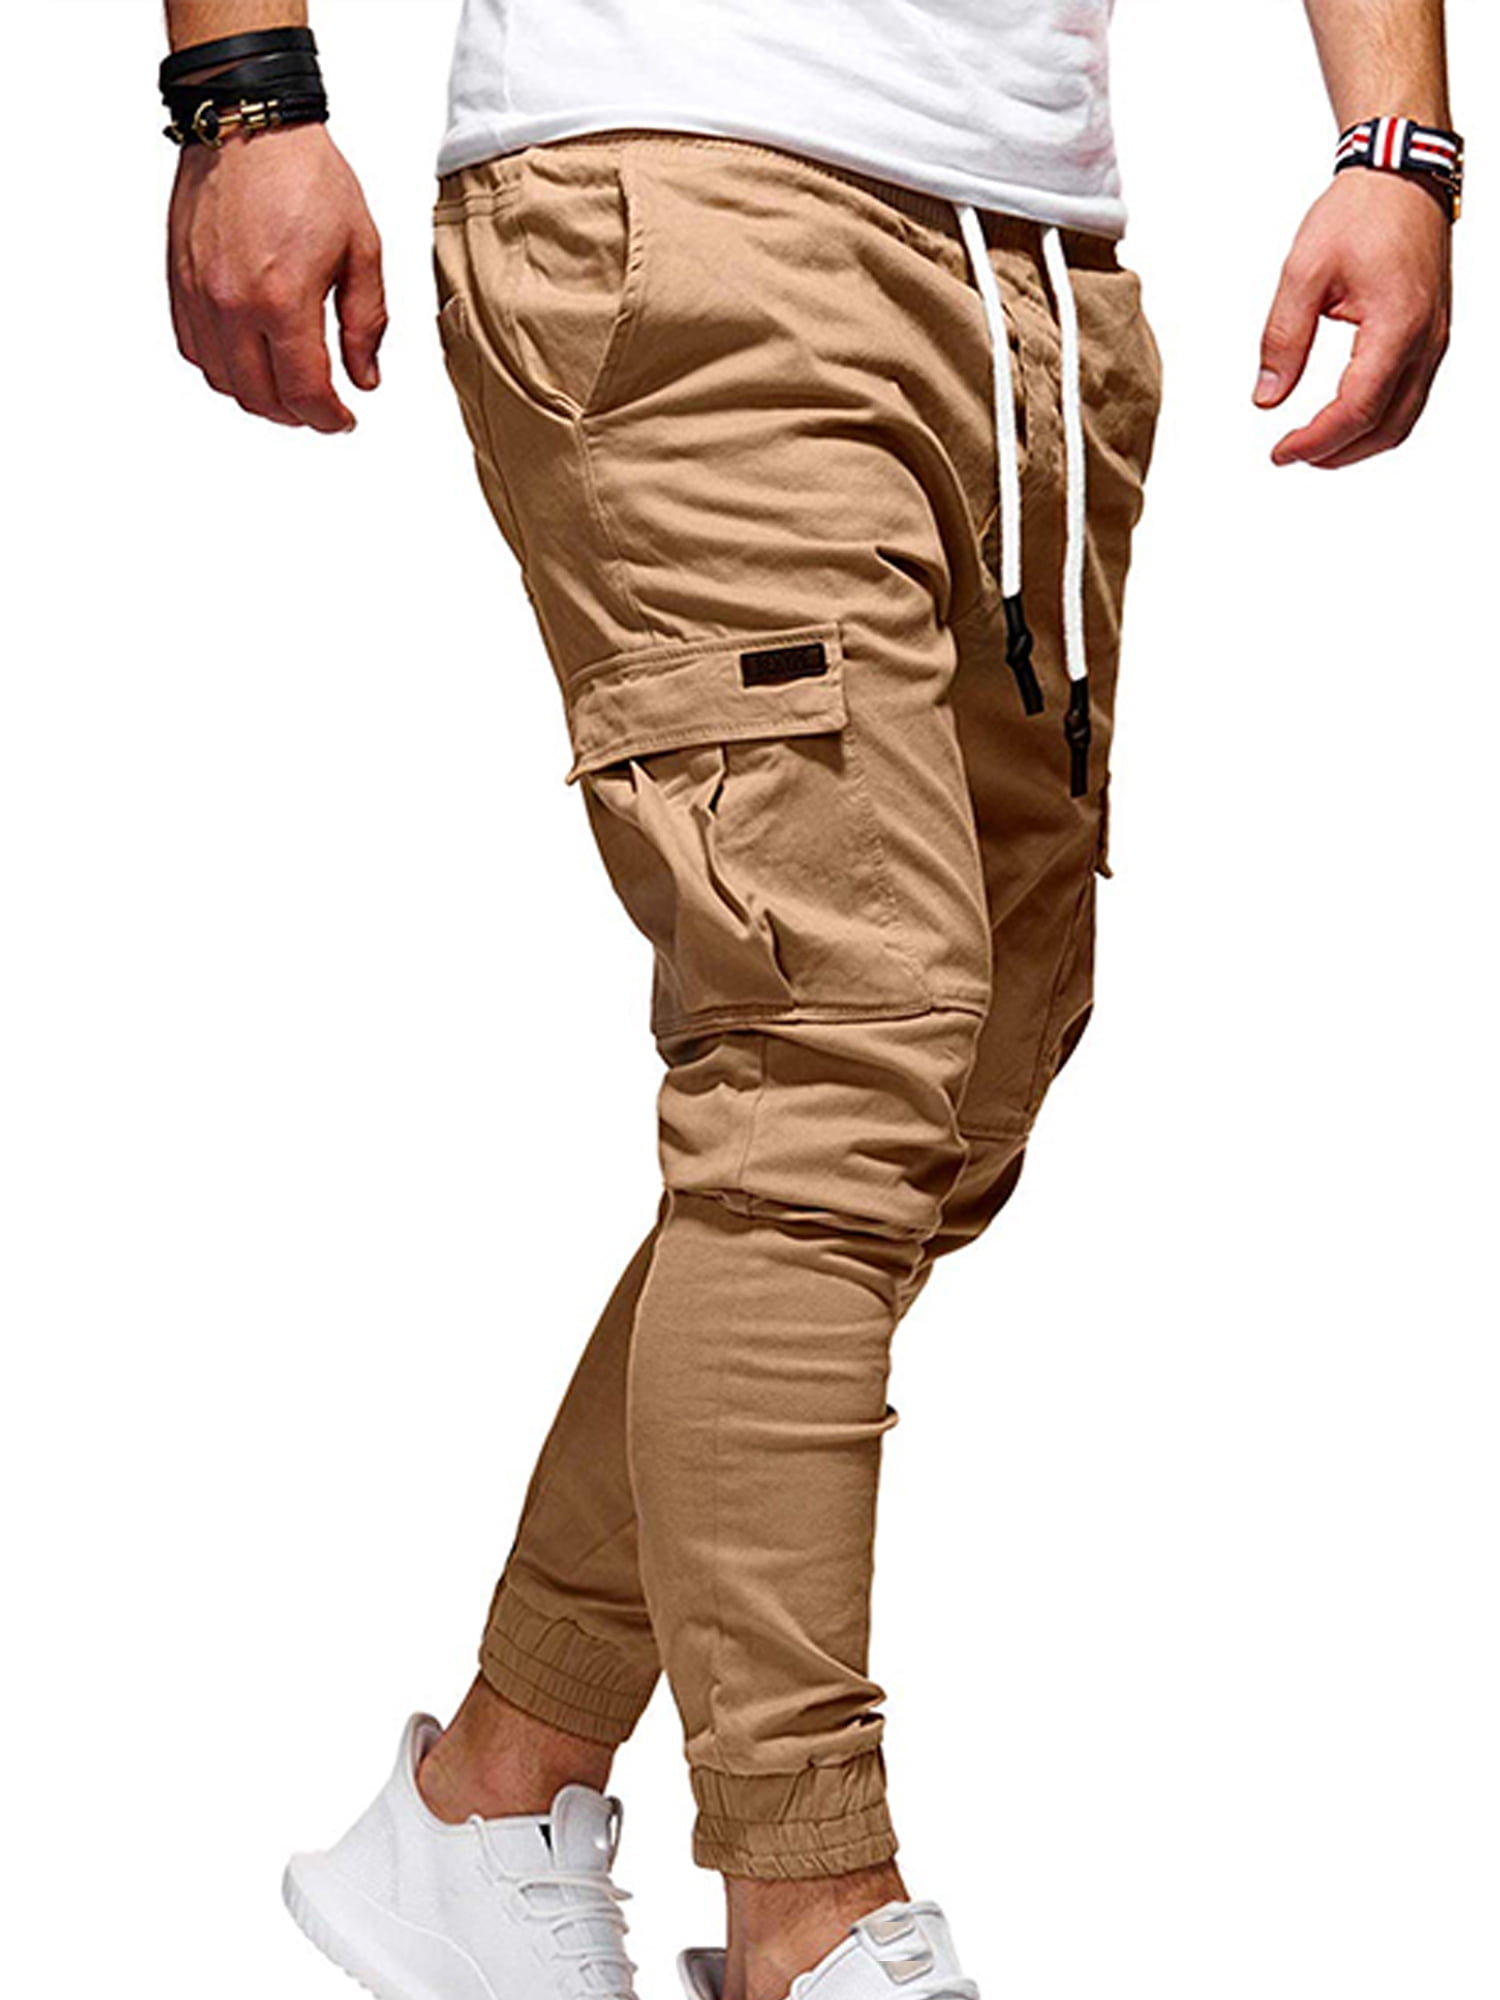 Simple Cargo workout pants for Beginner